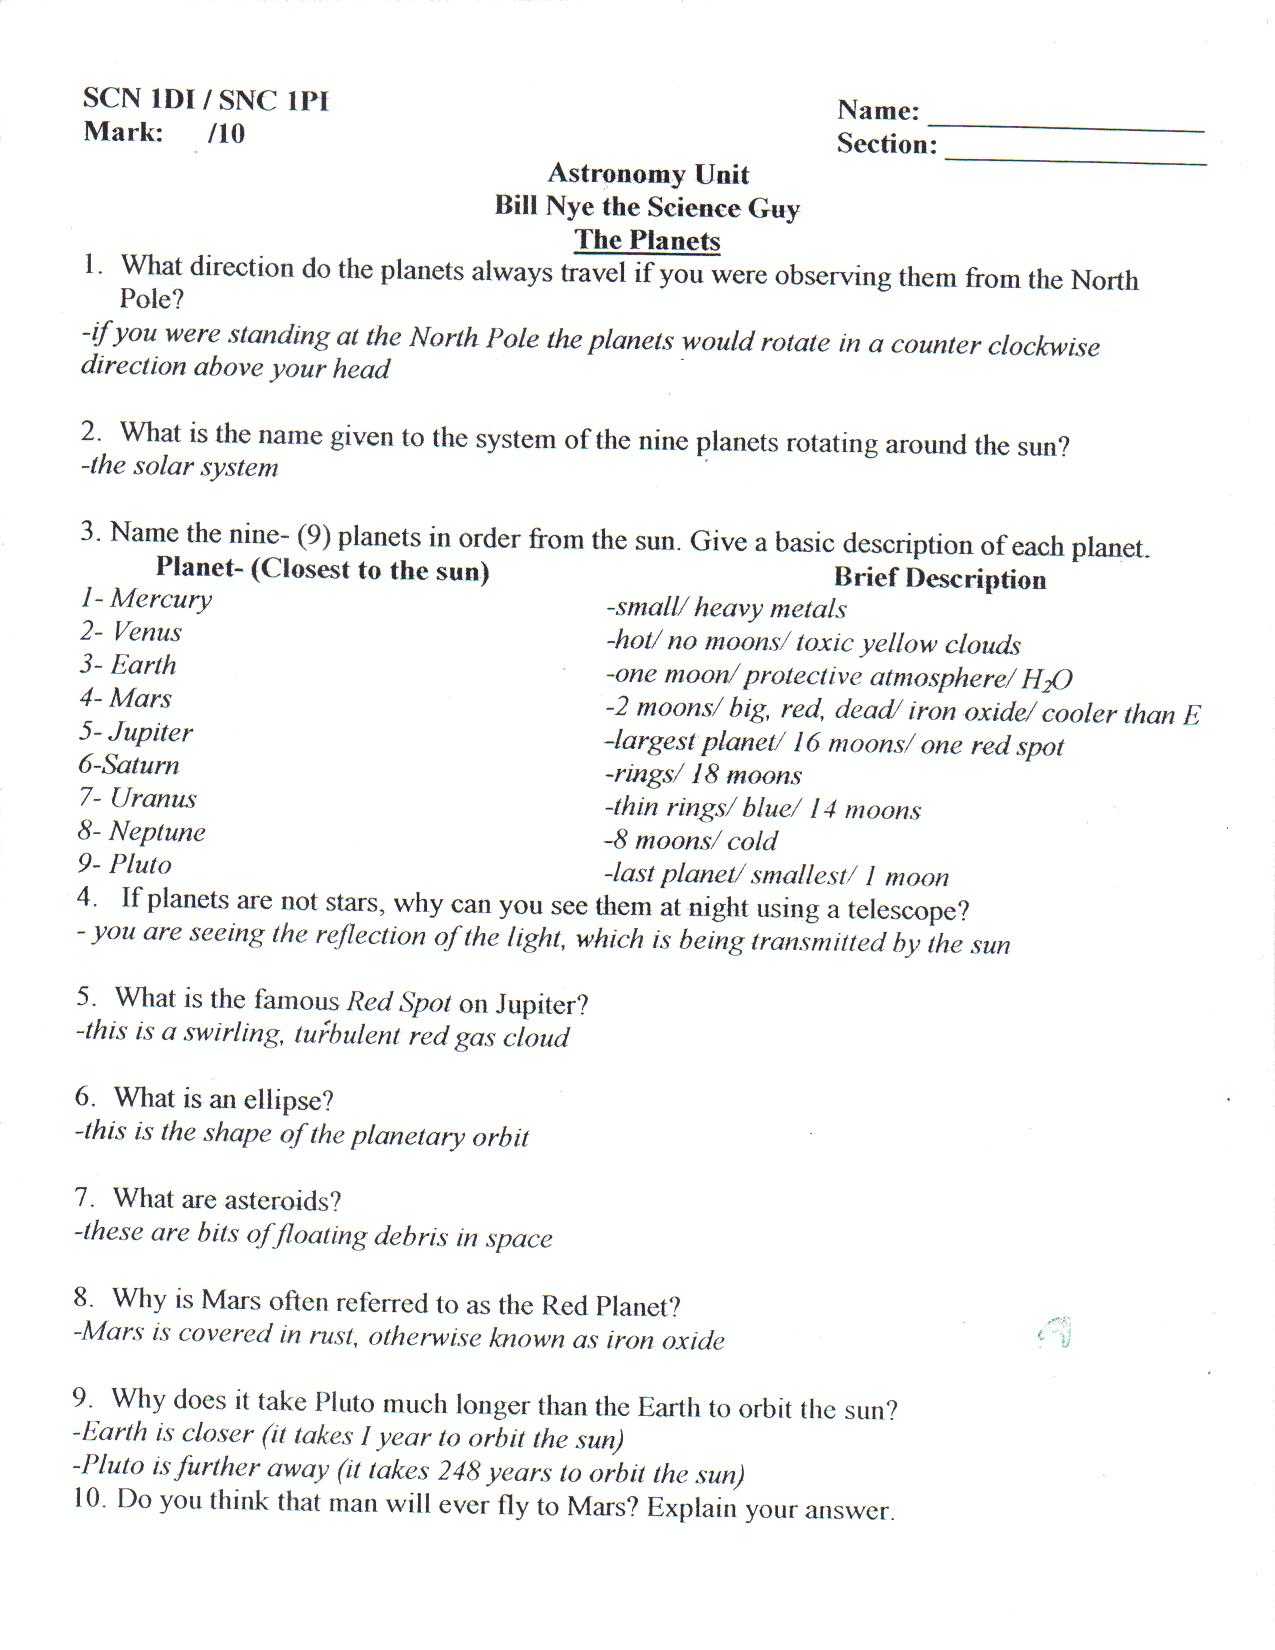 Skills Worksheet Concept Review Answer Key Holt Environmental Science or Earth In Space Worksheet Answer Key the Best Worksheets Image